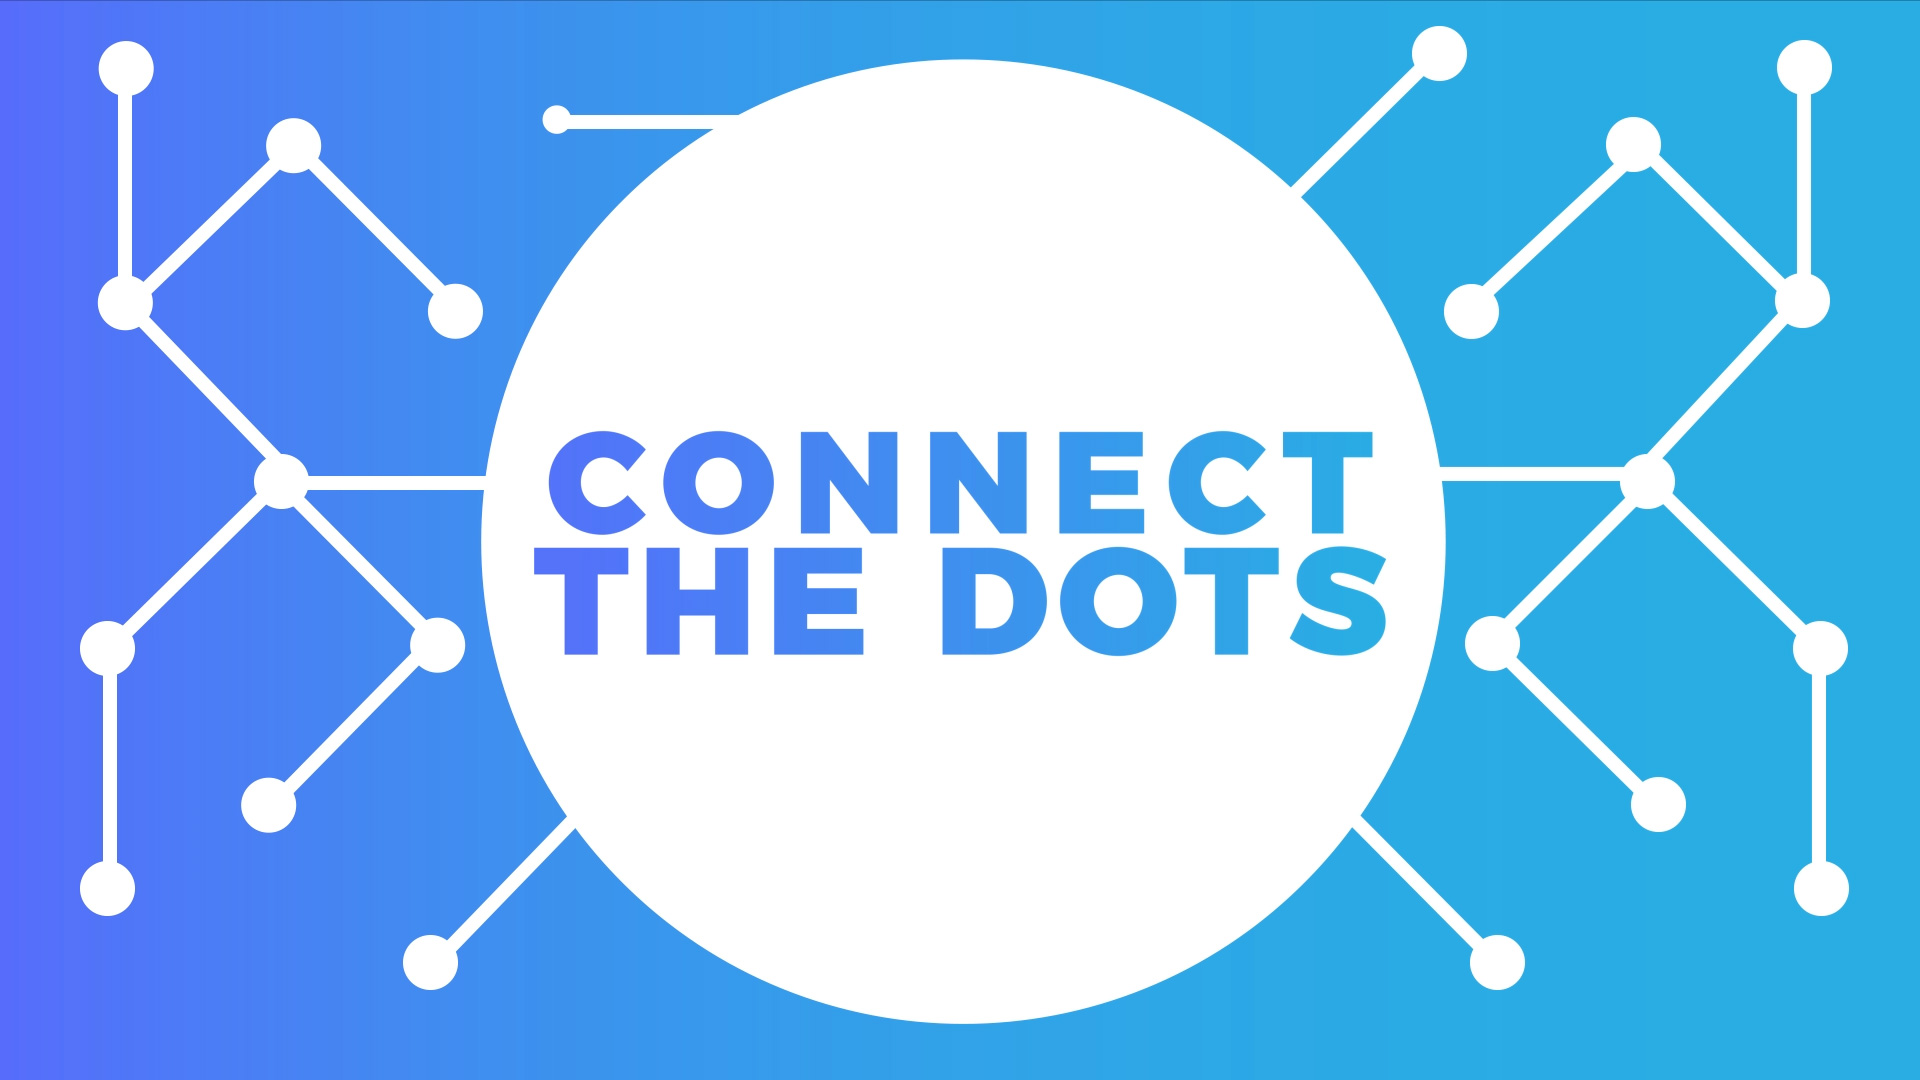 an illustrated image of gridlines and dots with text that says "Connect the Dots"